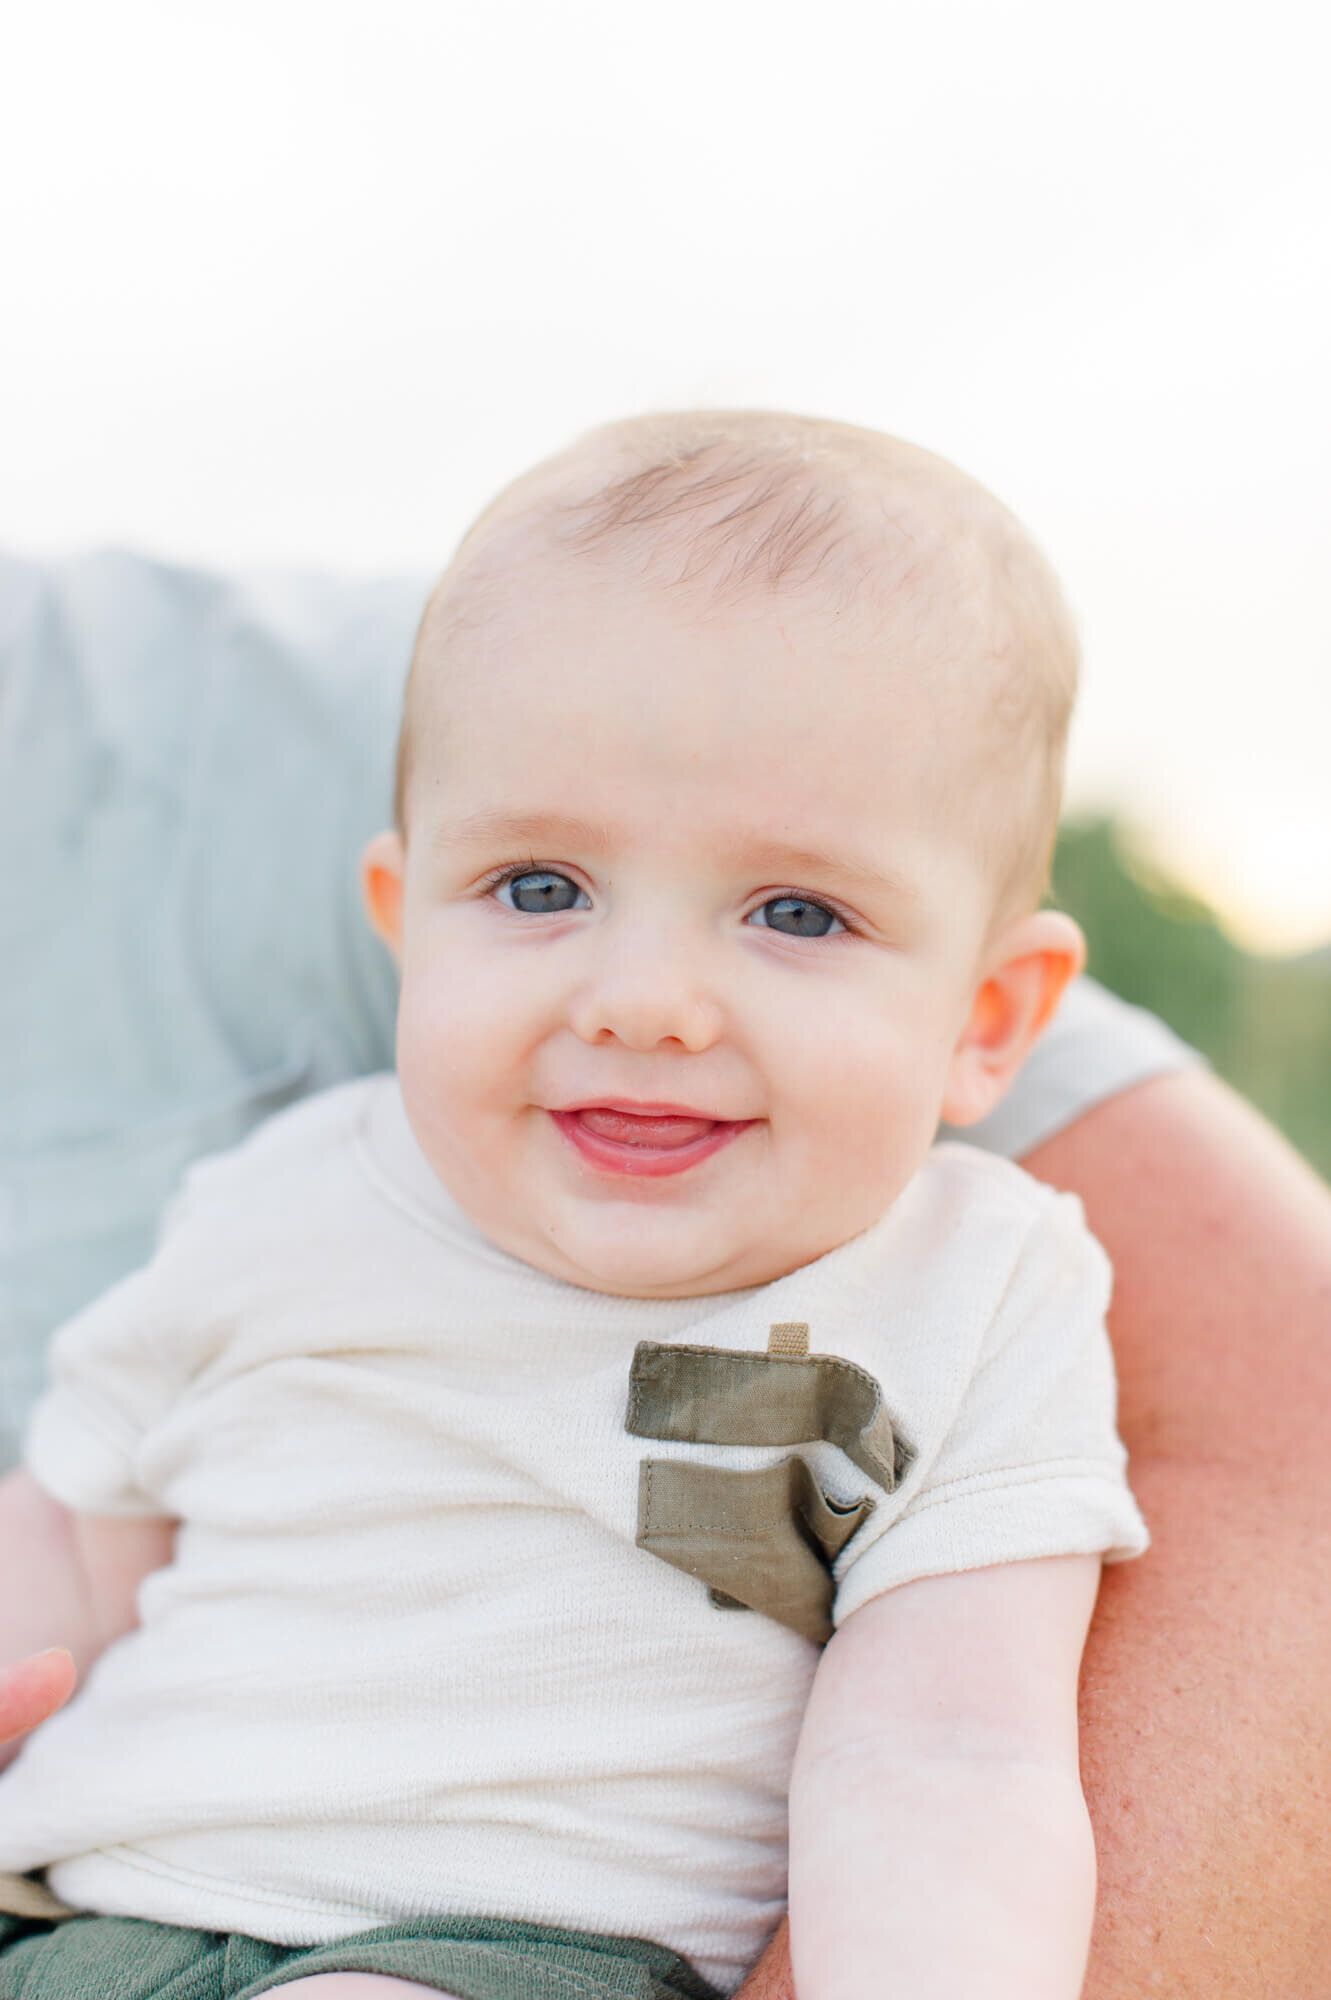 Sweet 6 month old happy smiling baby with a big gummy smile and blue eyes